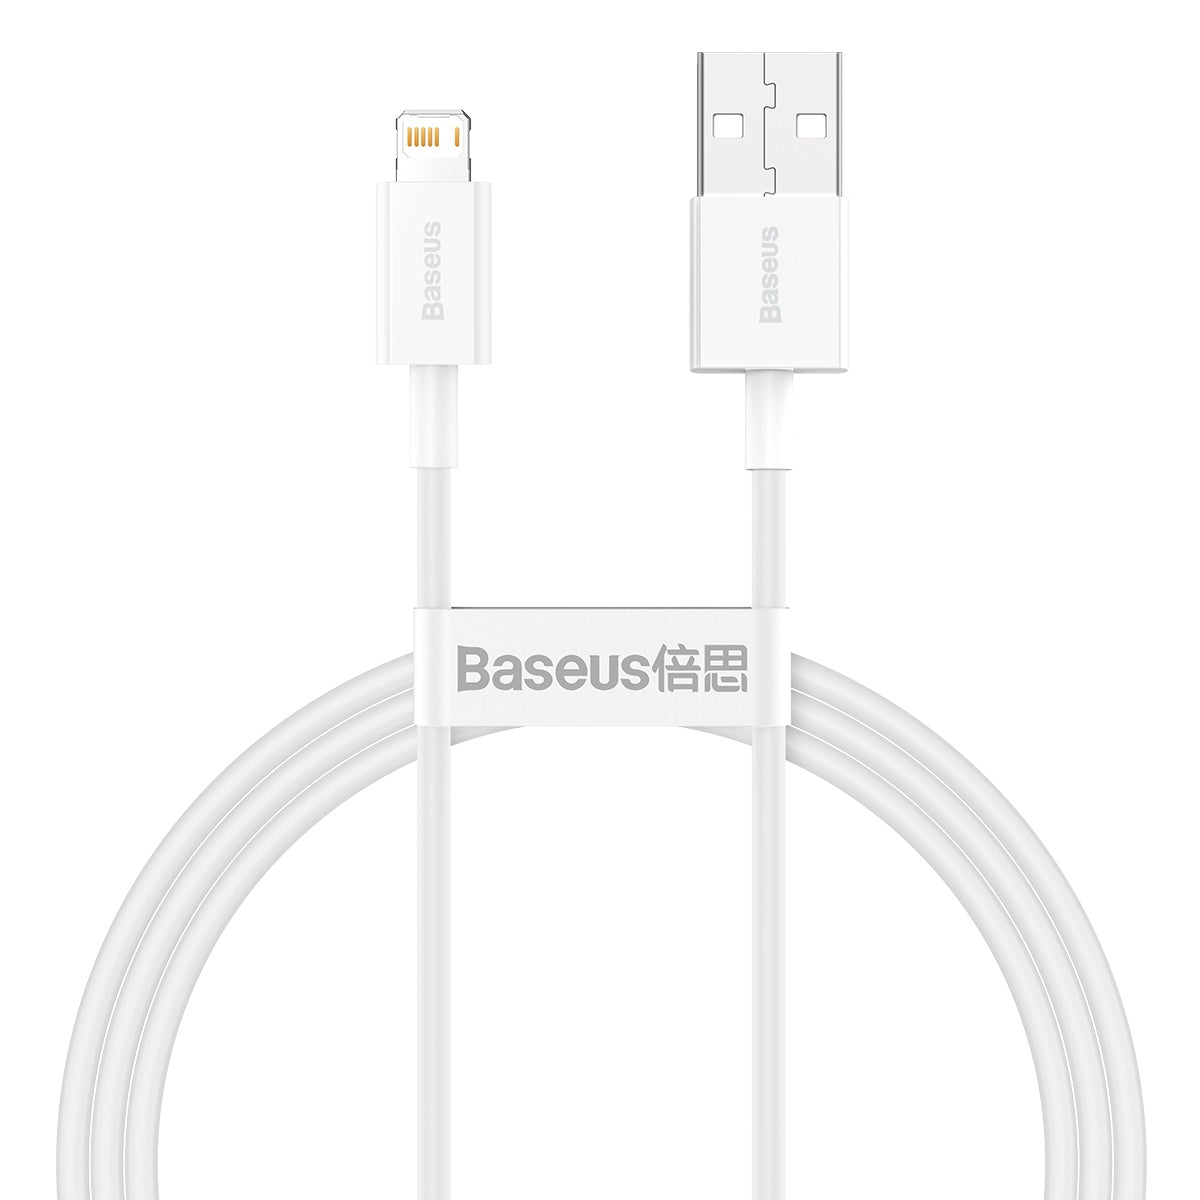 Baseus Superior Charging Data Cable USB to iP White Price in Pakistan 